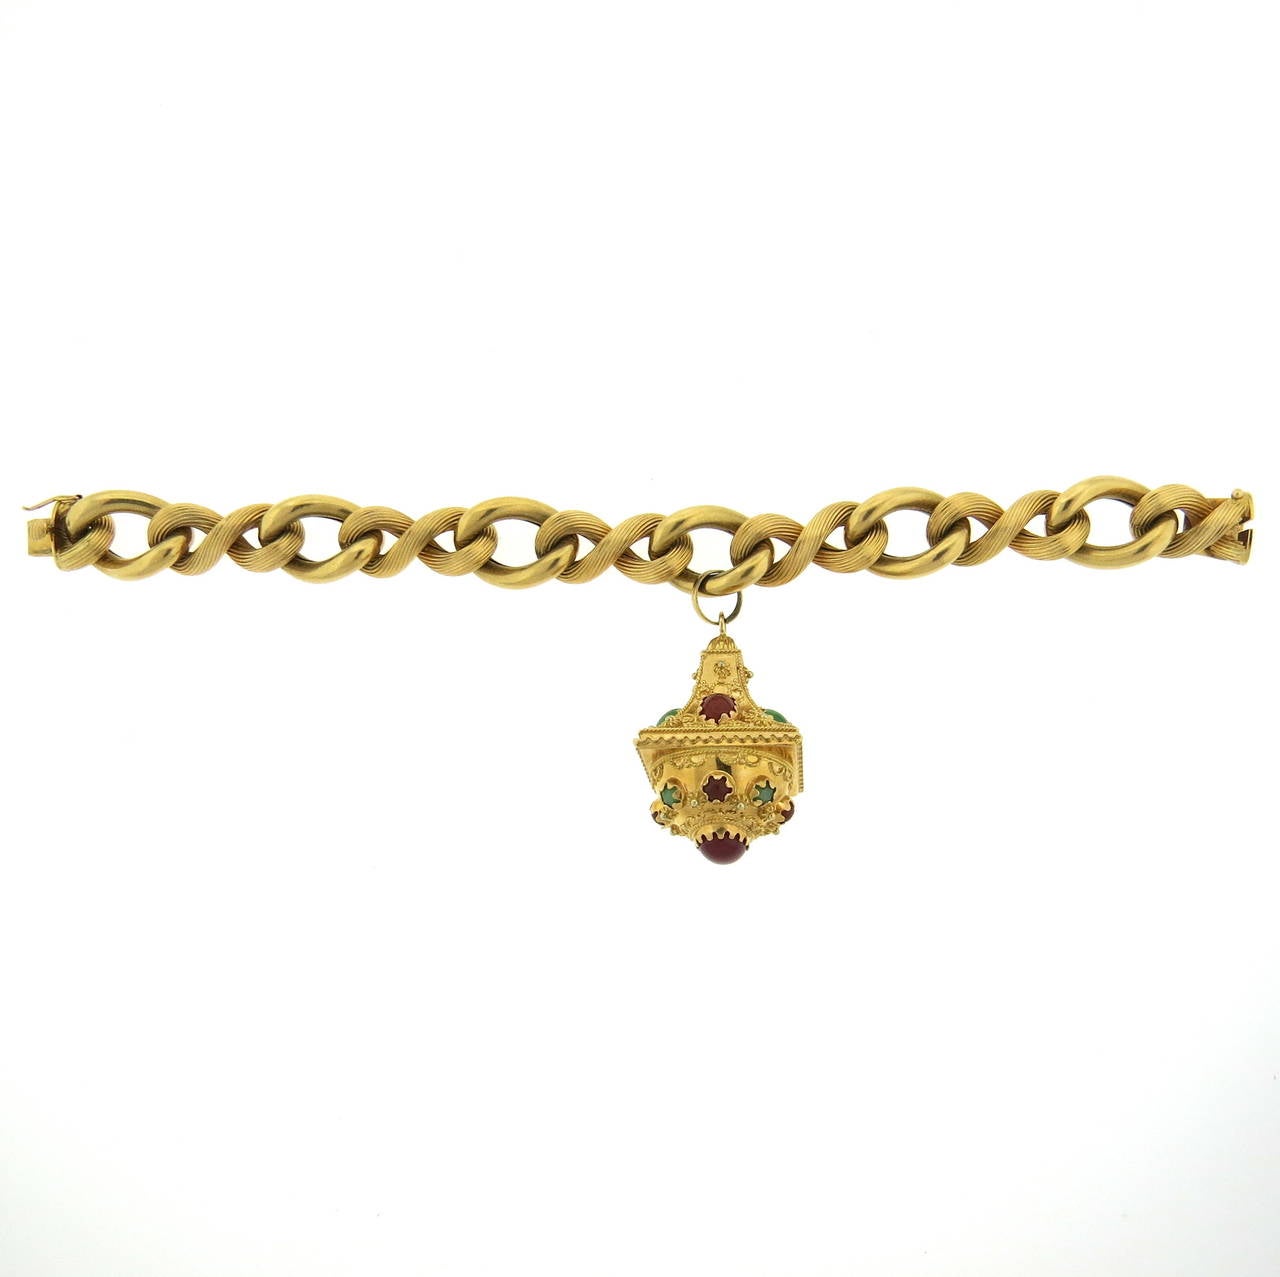 An 18k yellow gold bracelet with a charm set with nephrite and carnelian.  The bracelet measures 7.75